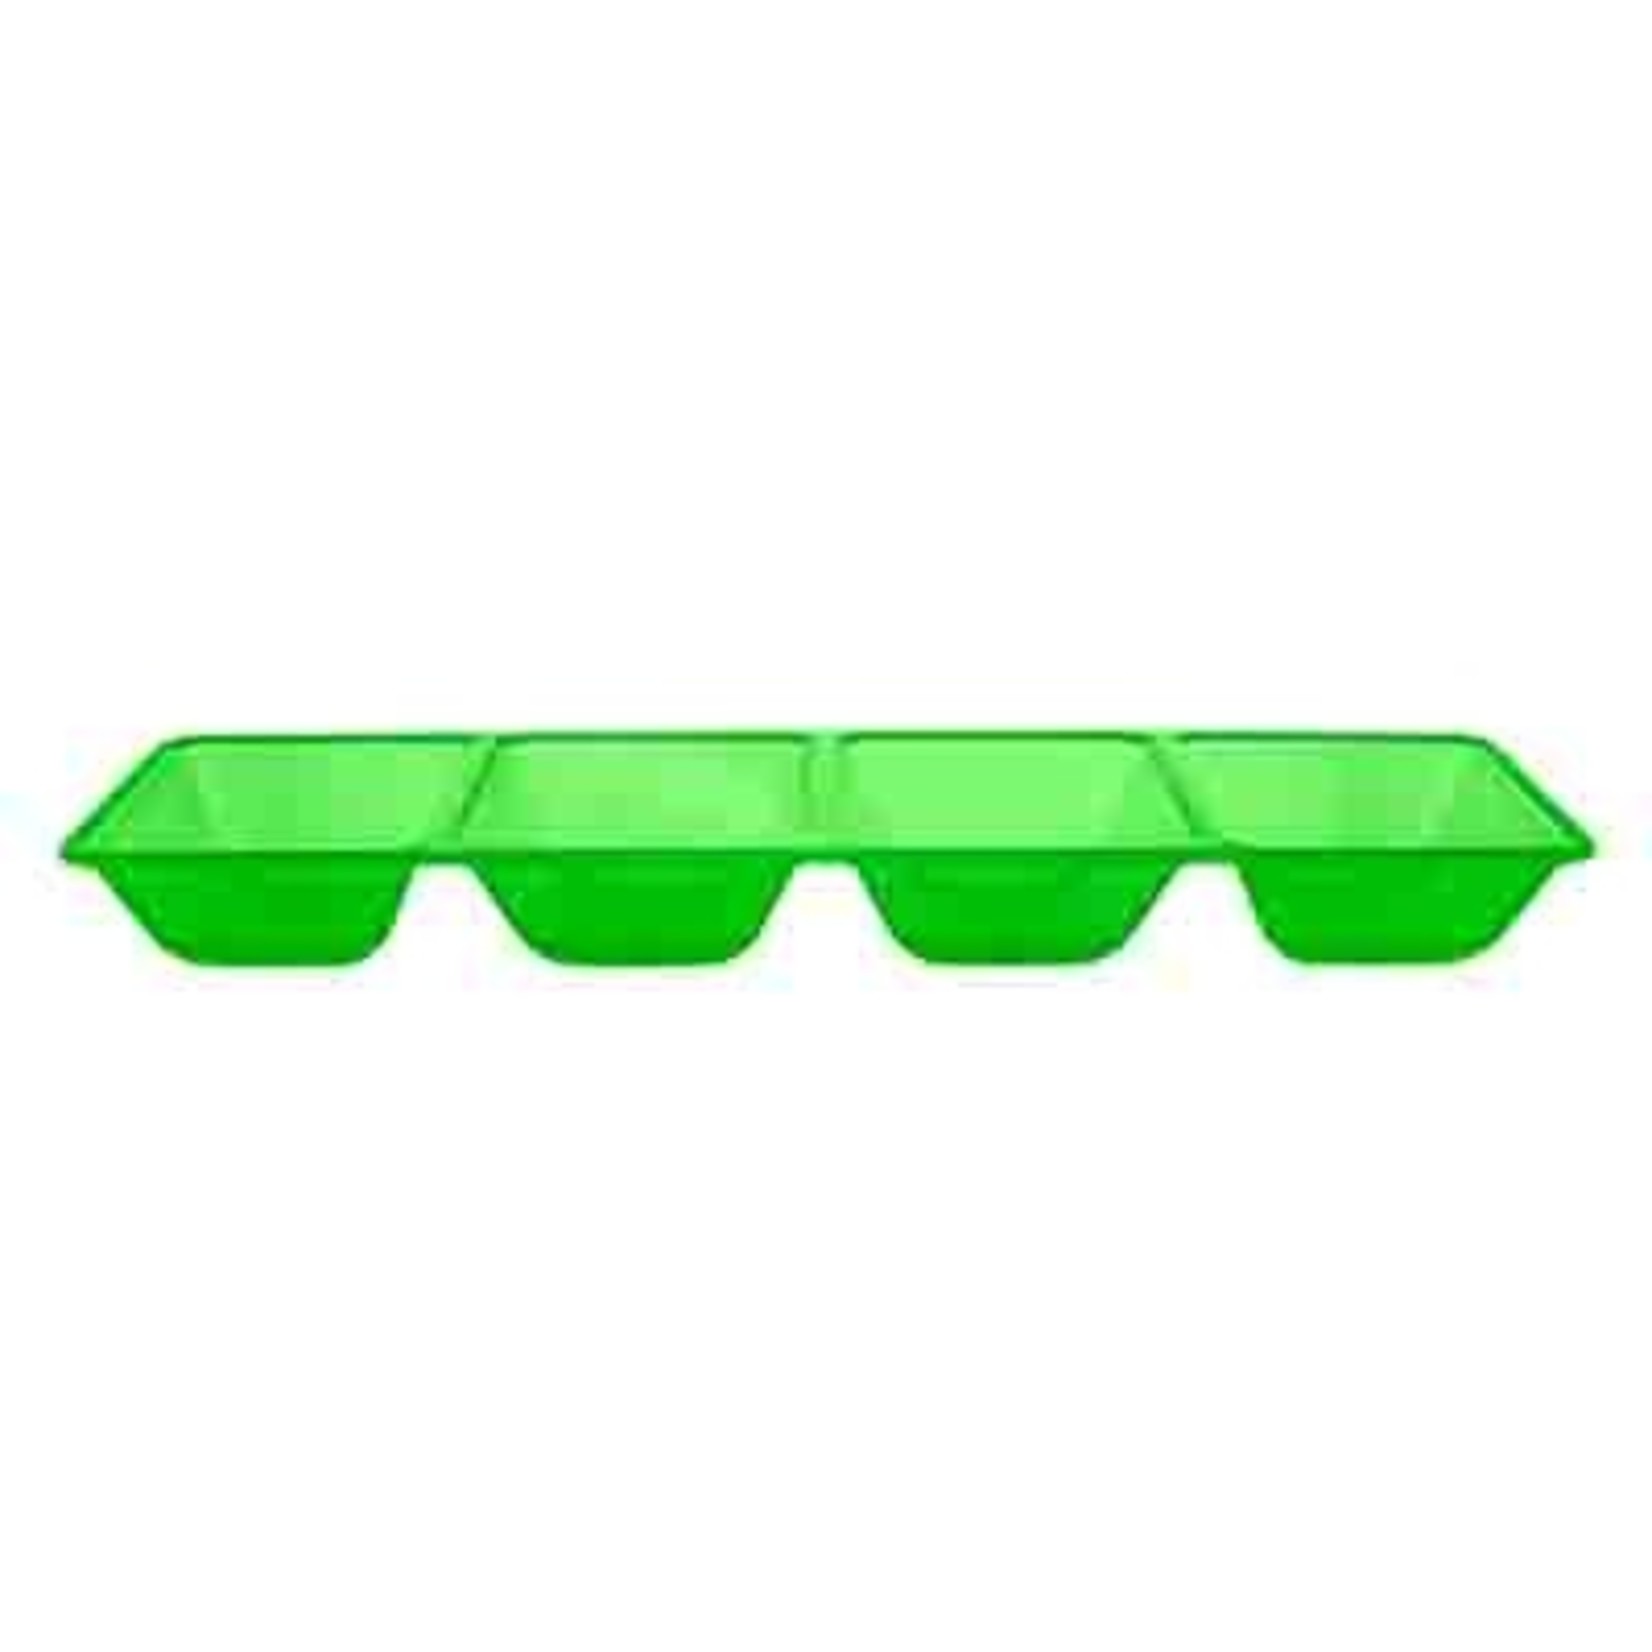 northwest Neon Green 4 Compartment Tray - 1ct.